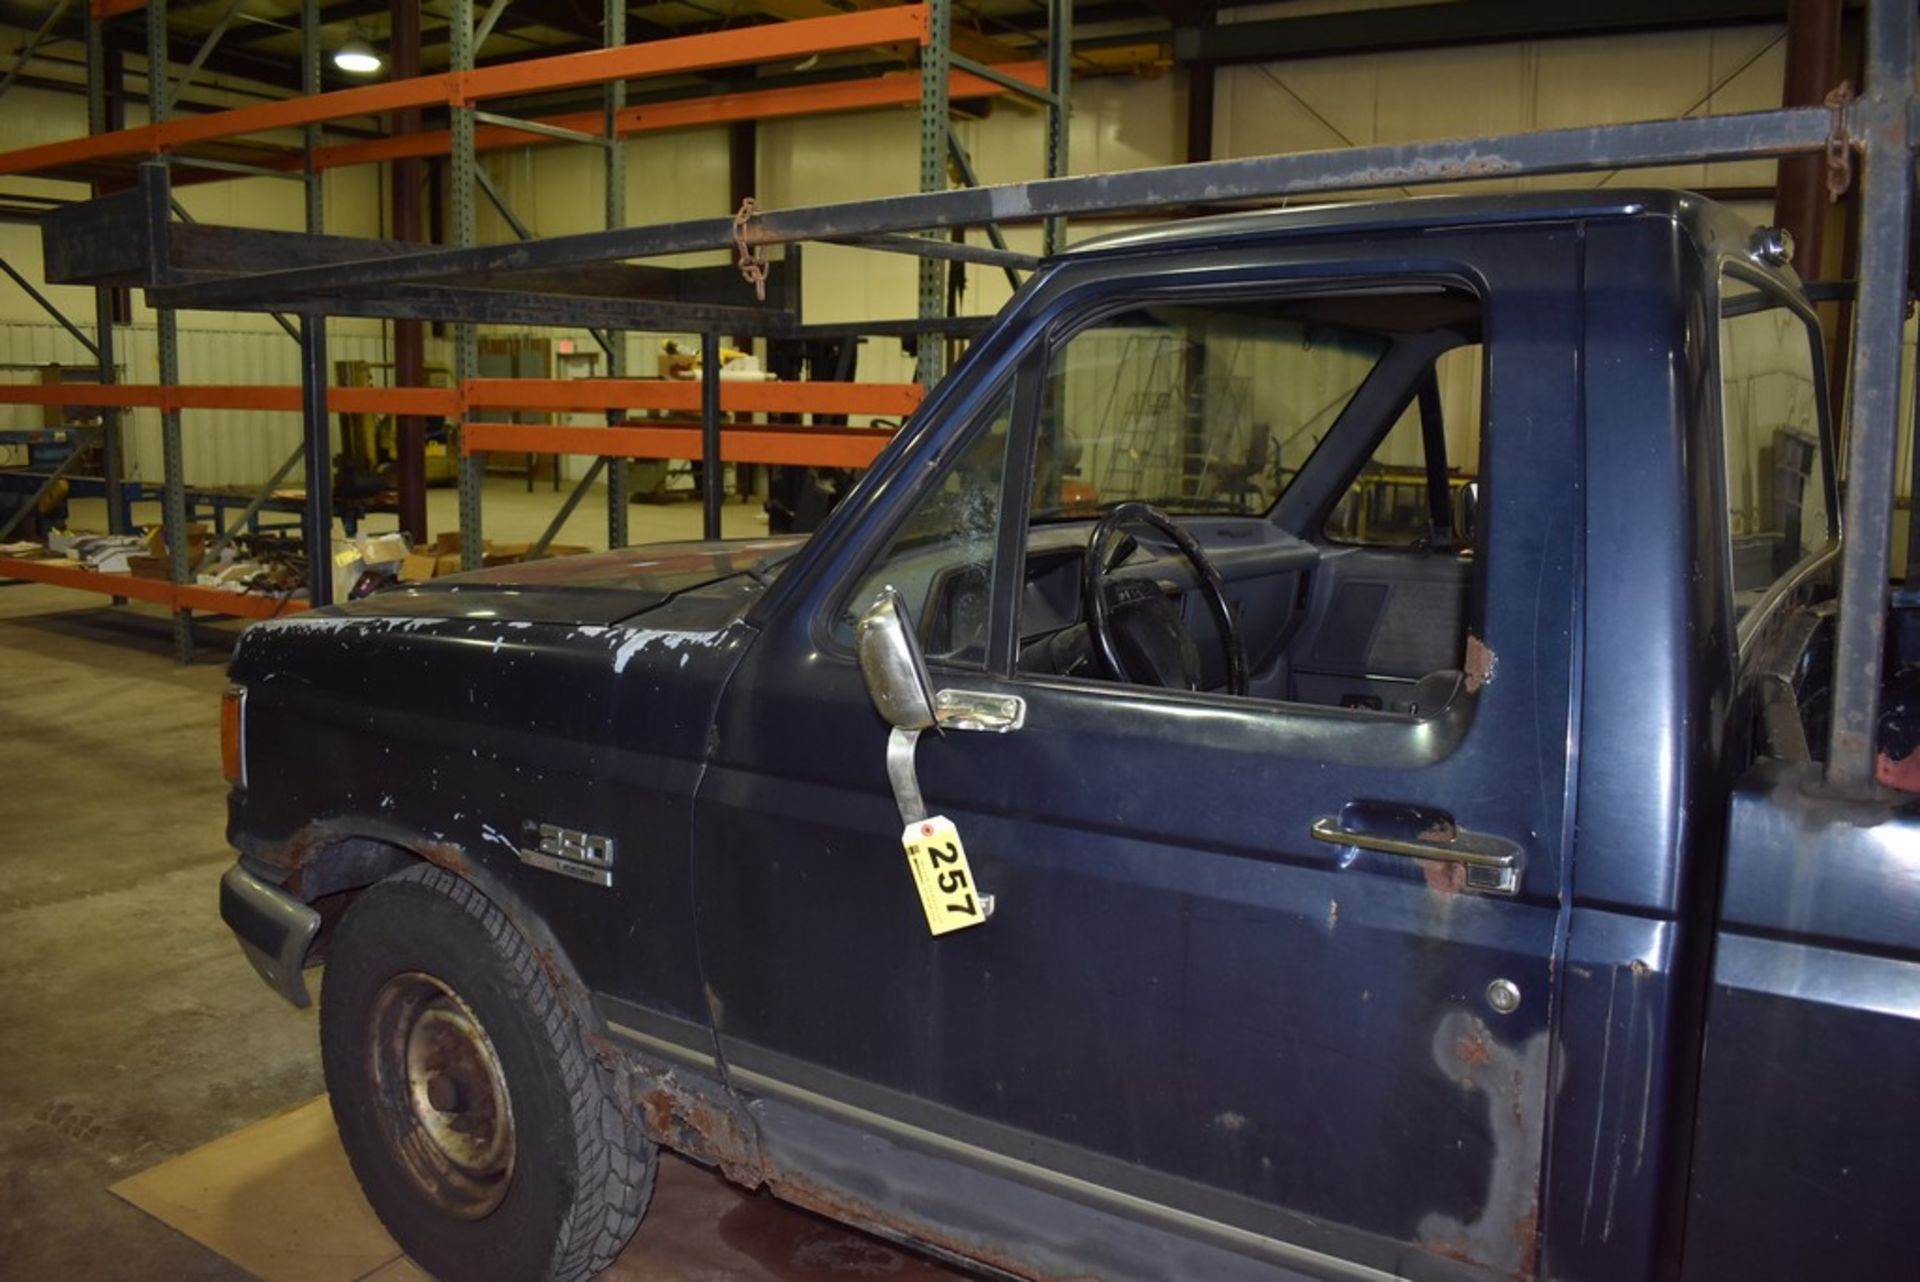 Ford F250 XLT Larriat Pick Up Truck, - Image 9 of 12